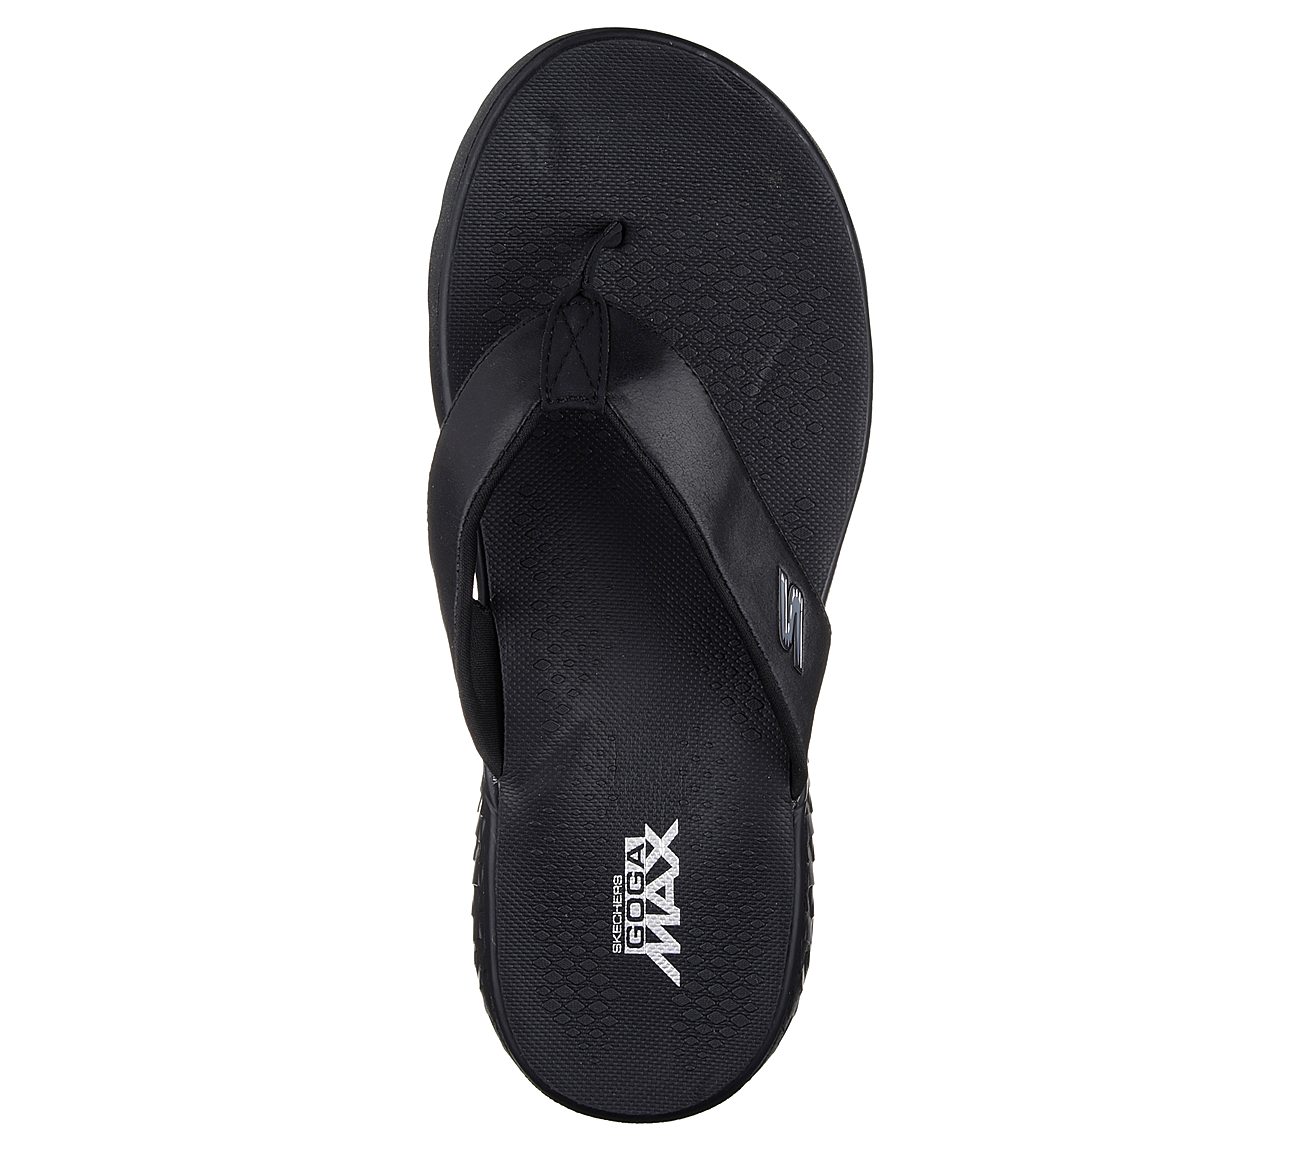 ON-THE-GO 400 - VISTA, BBLACK Footwear Top View